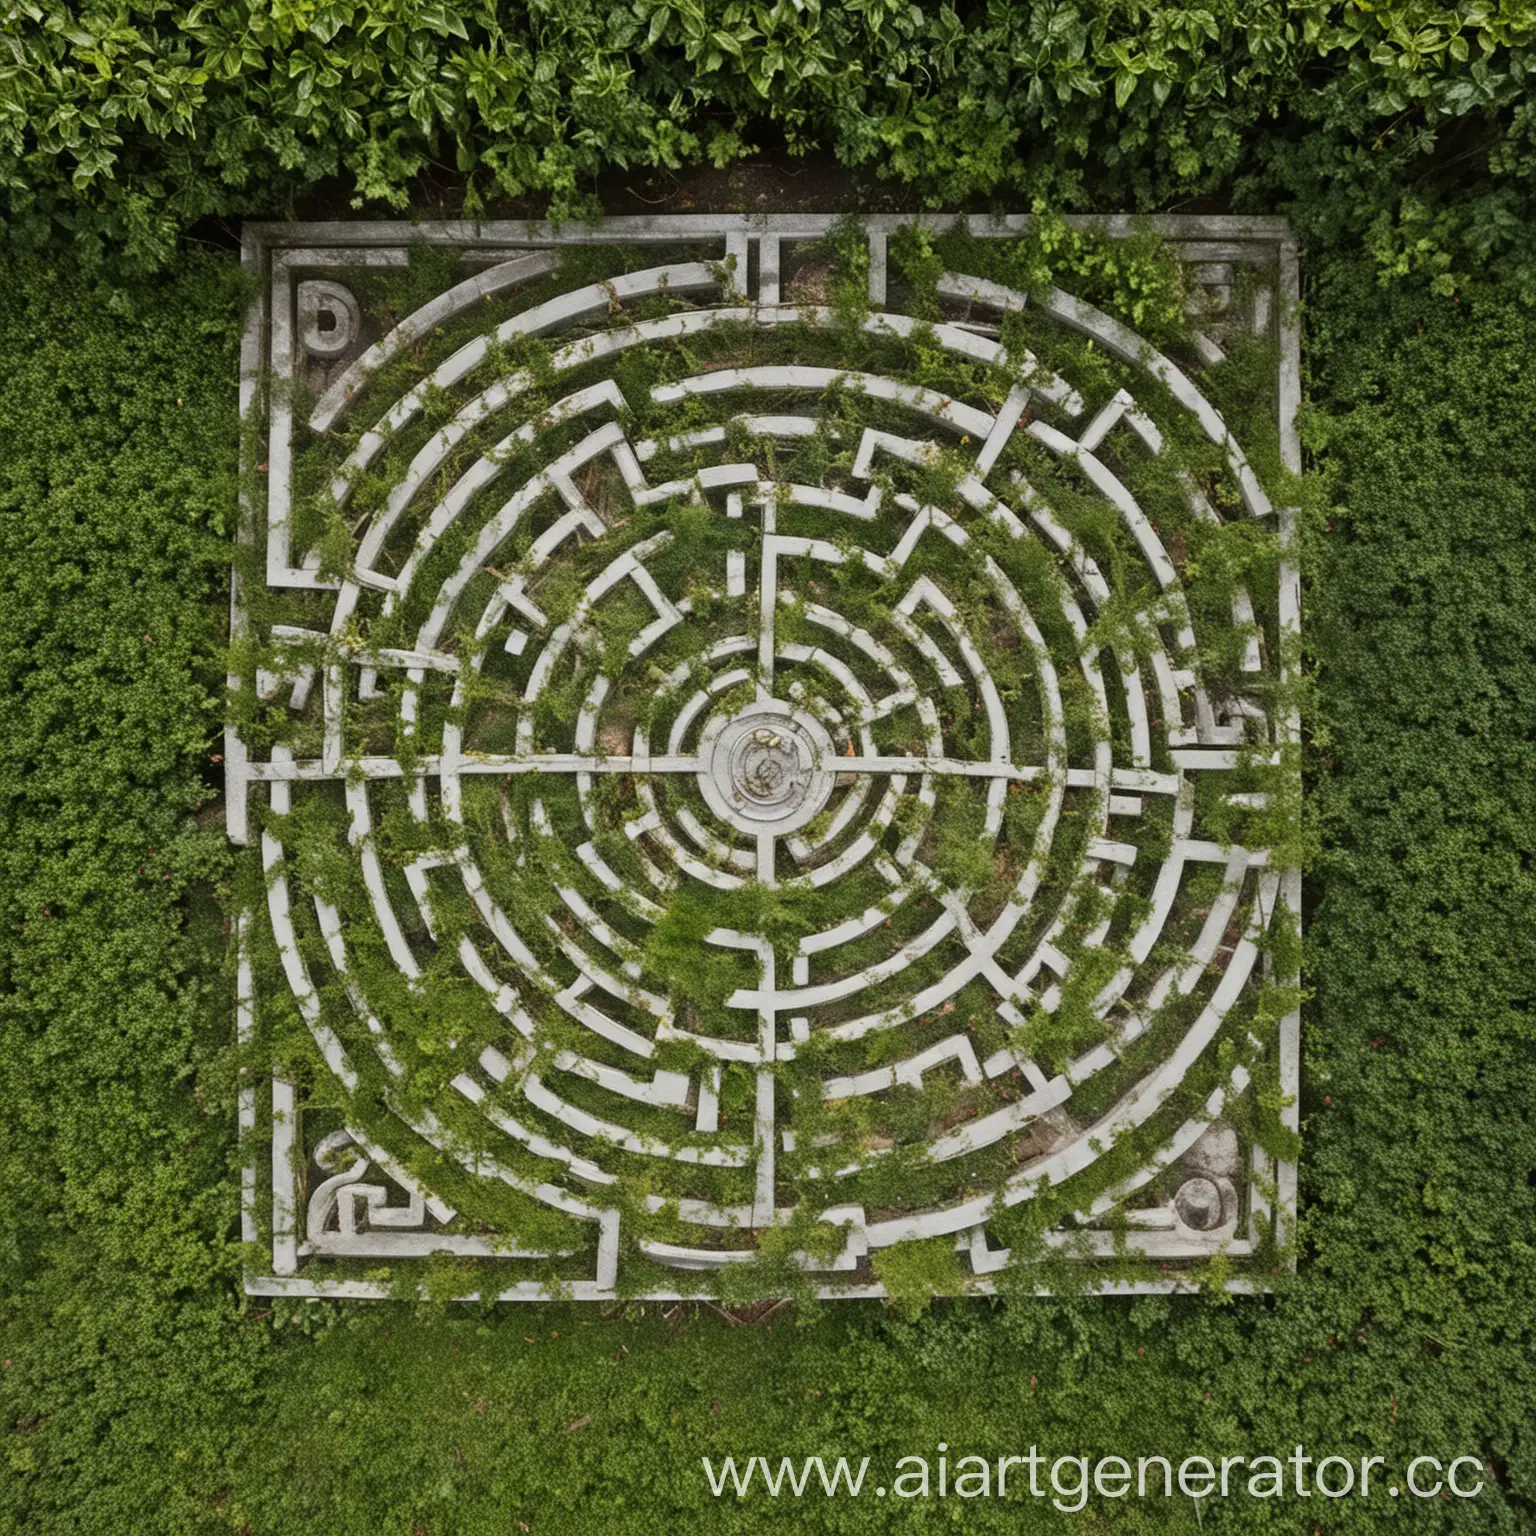 Concrete-and-Vine-Labyrinth-Aerial-View-of-Intricate-Maze-with-5-Trials